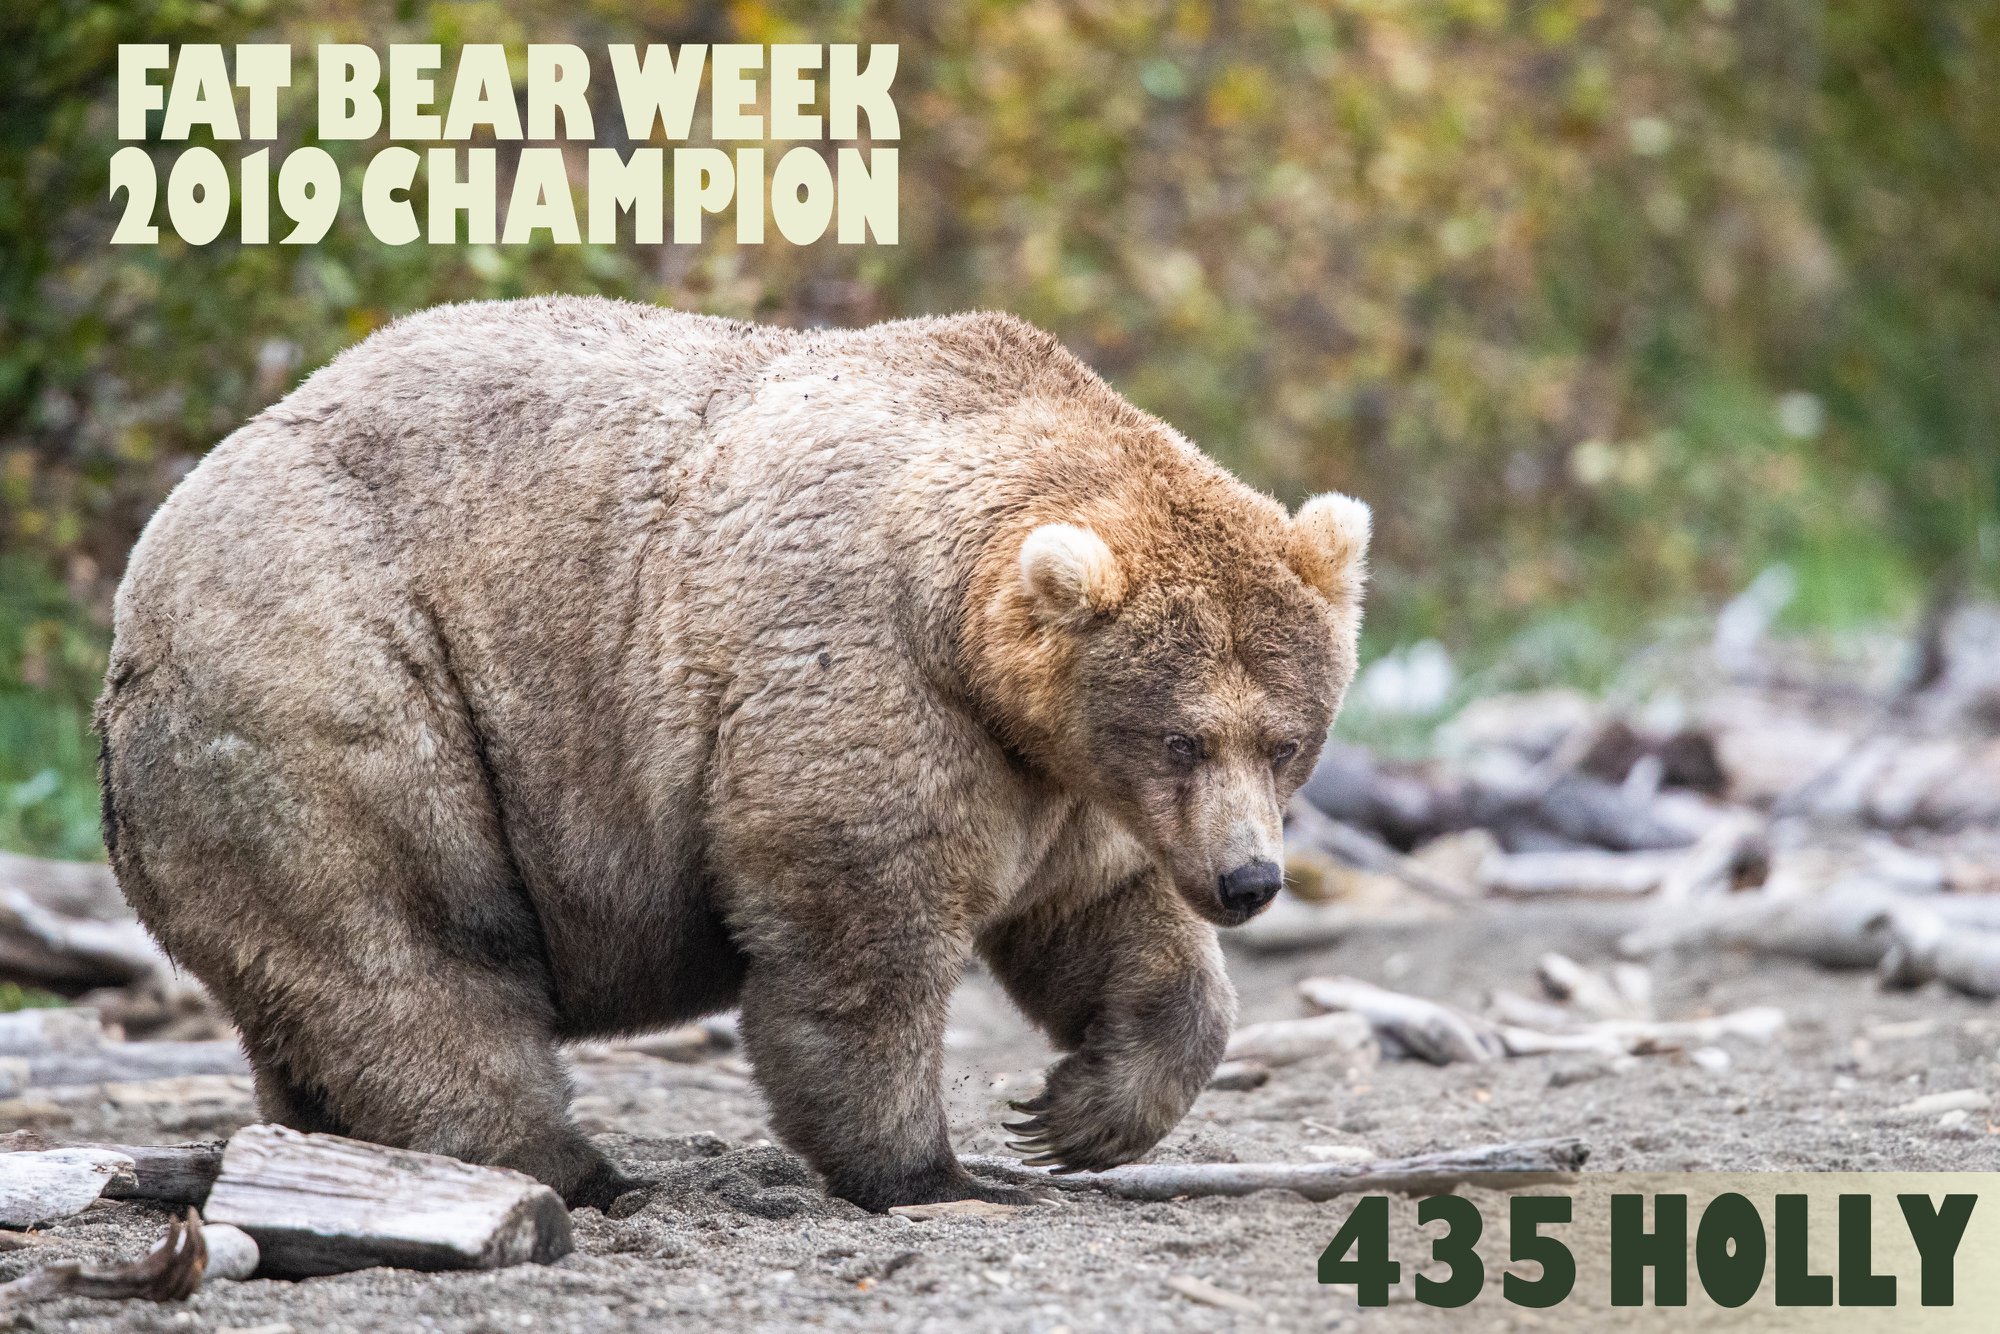 PHOTO: Holly is the 2019 Fat Bear Week Champion.